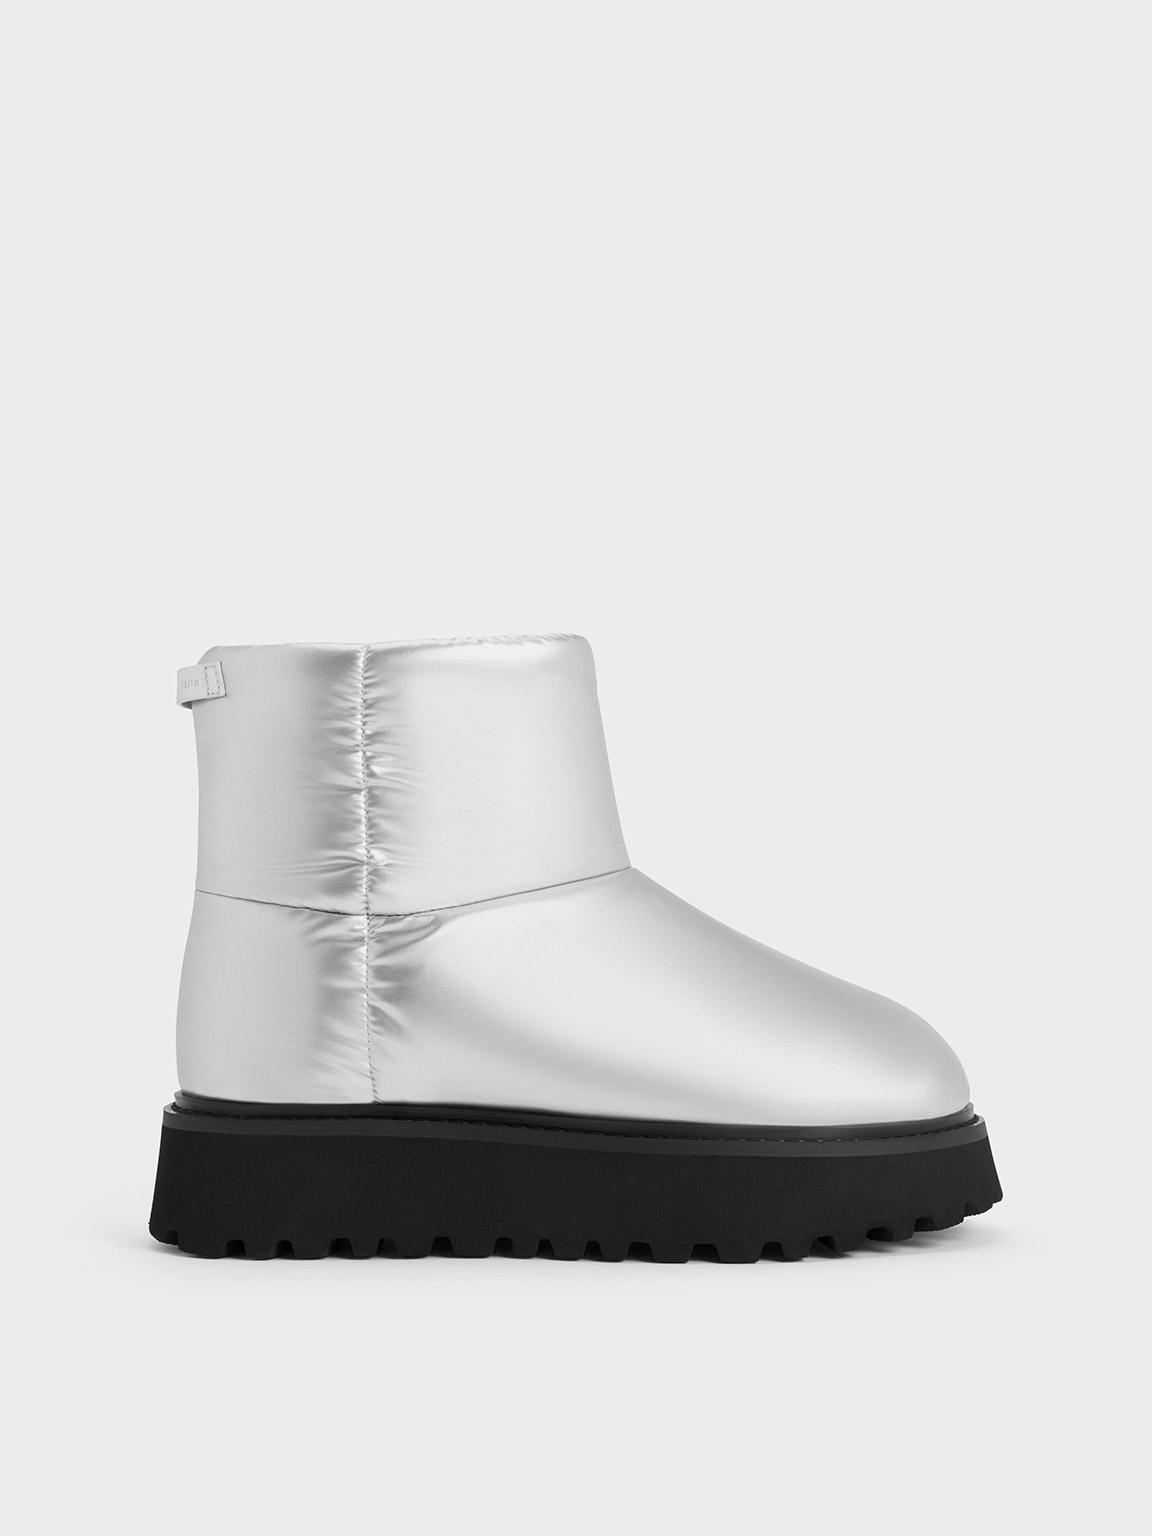 Charles & Keith Women's Pearl Buckle Lace-Up Ankle Boots